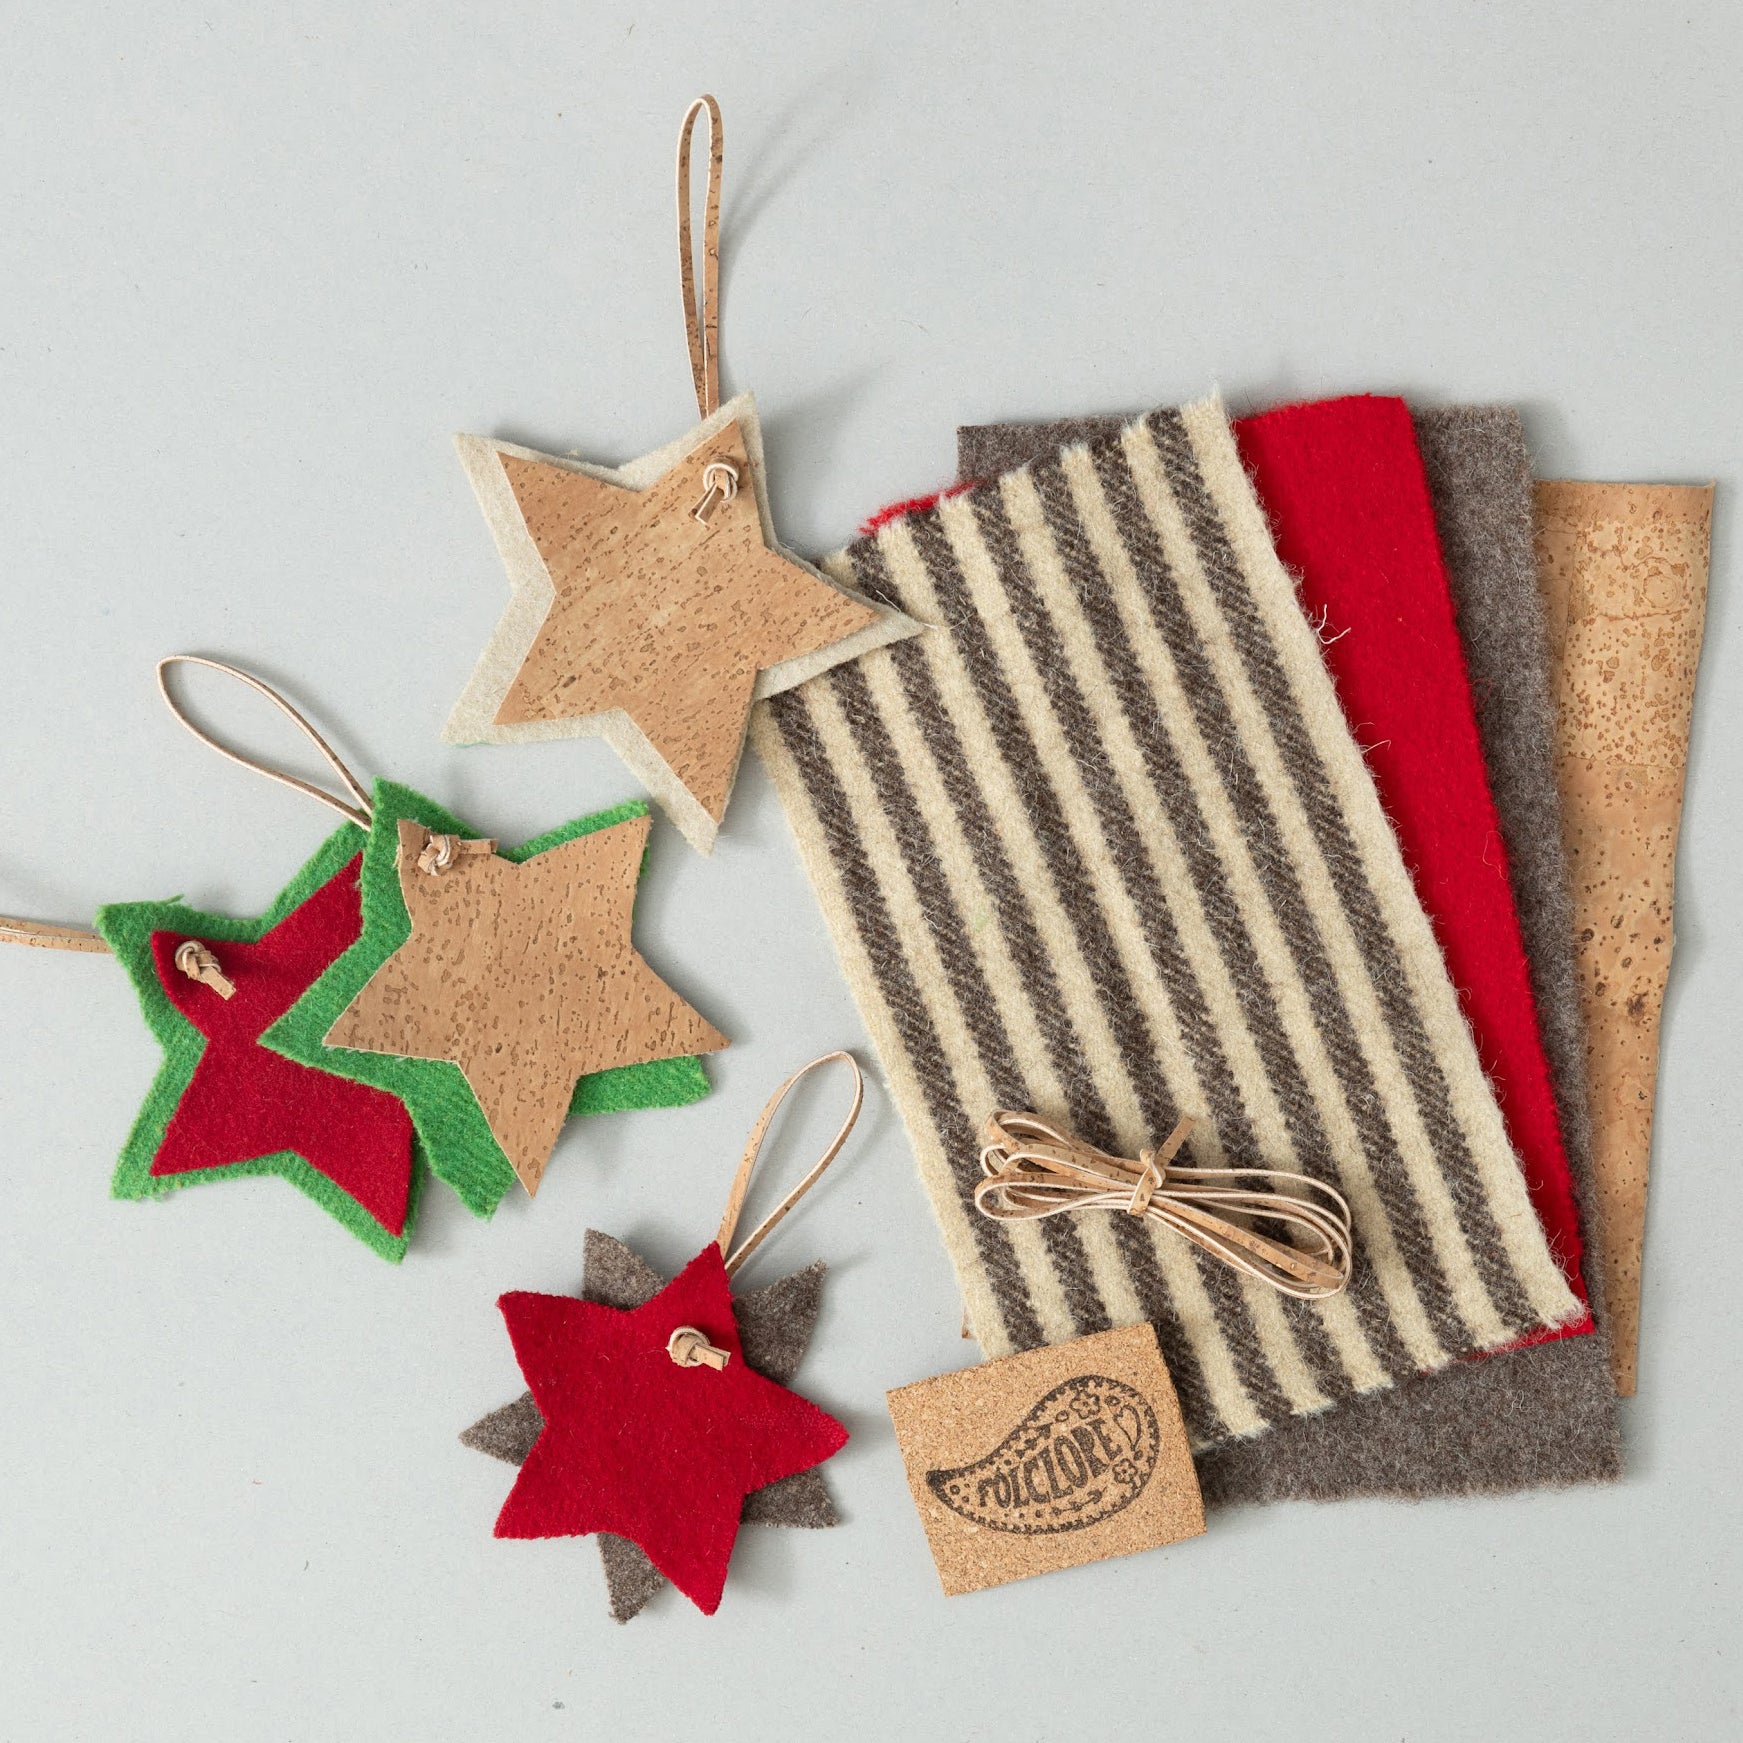 sustainable homemade kits with cork and boiled wool Portuguese craft supplies